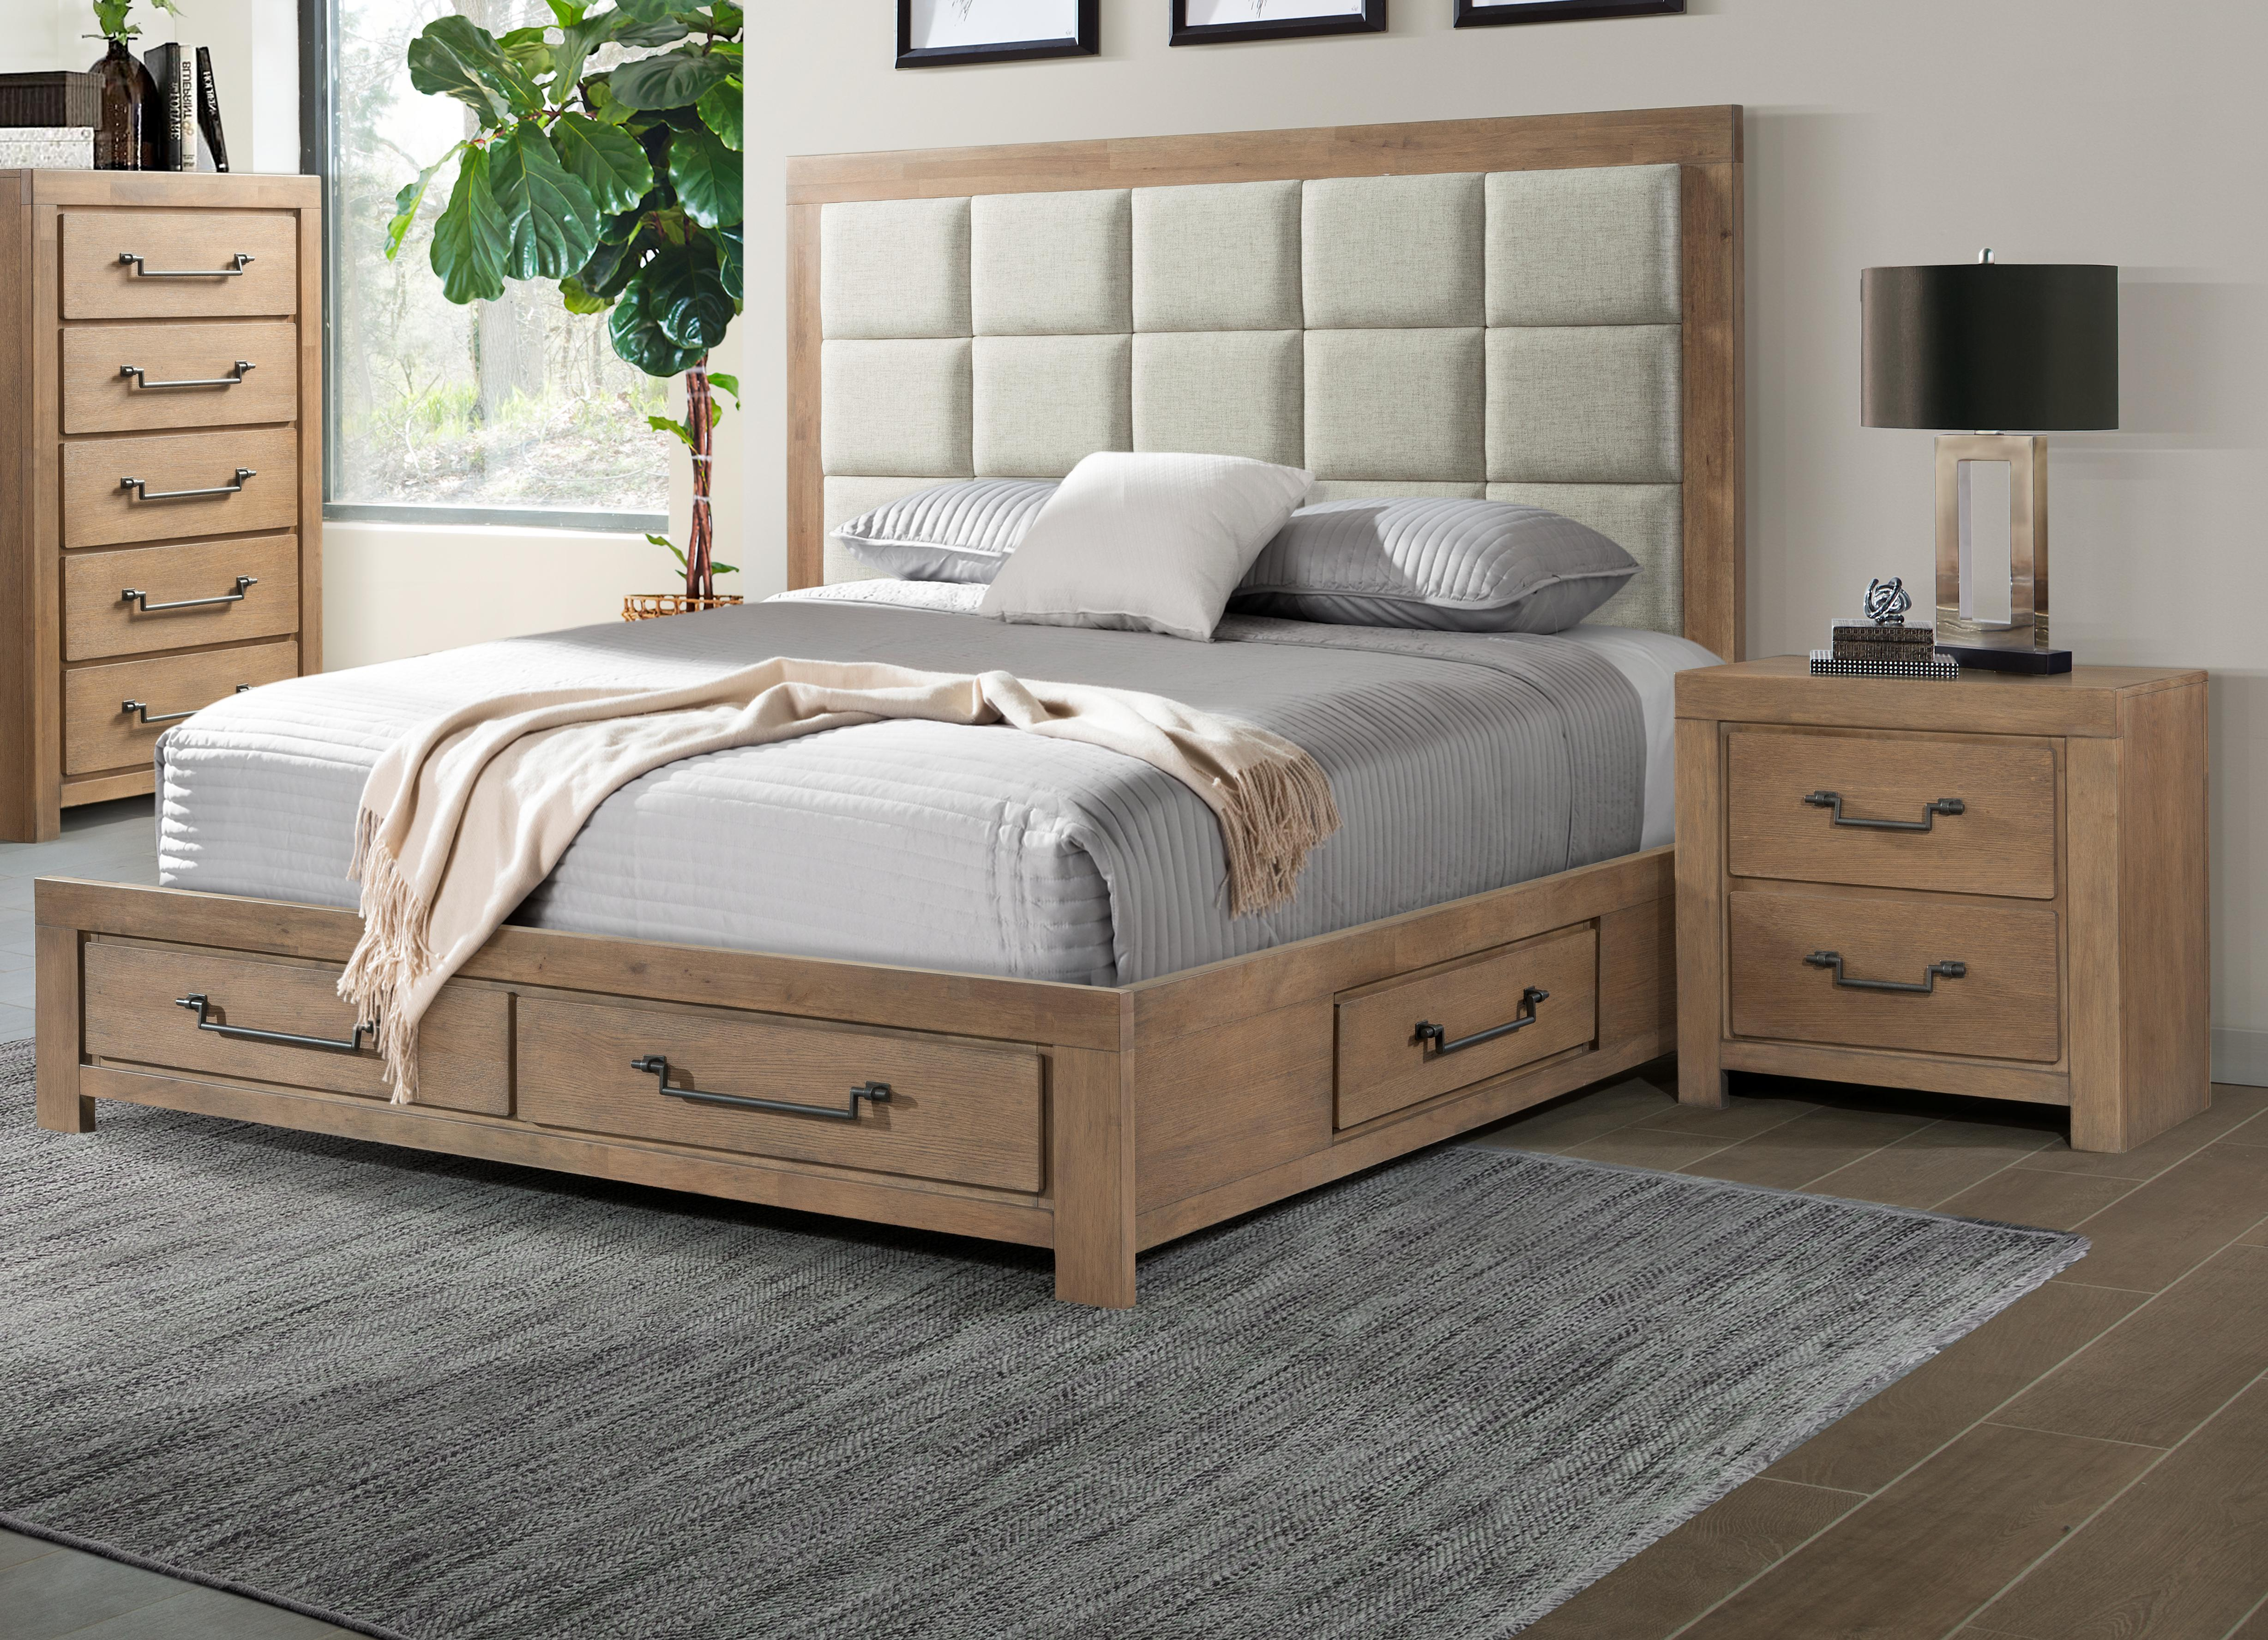 Lane Furniture Urban Swag Oak Wood 2pc Bedroom Set With Queen Bed pertaining to measurements 4913 X 3553